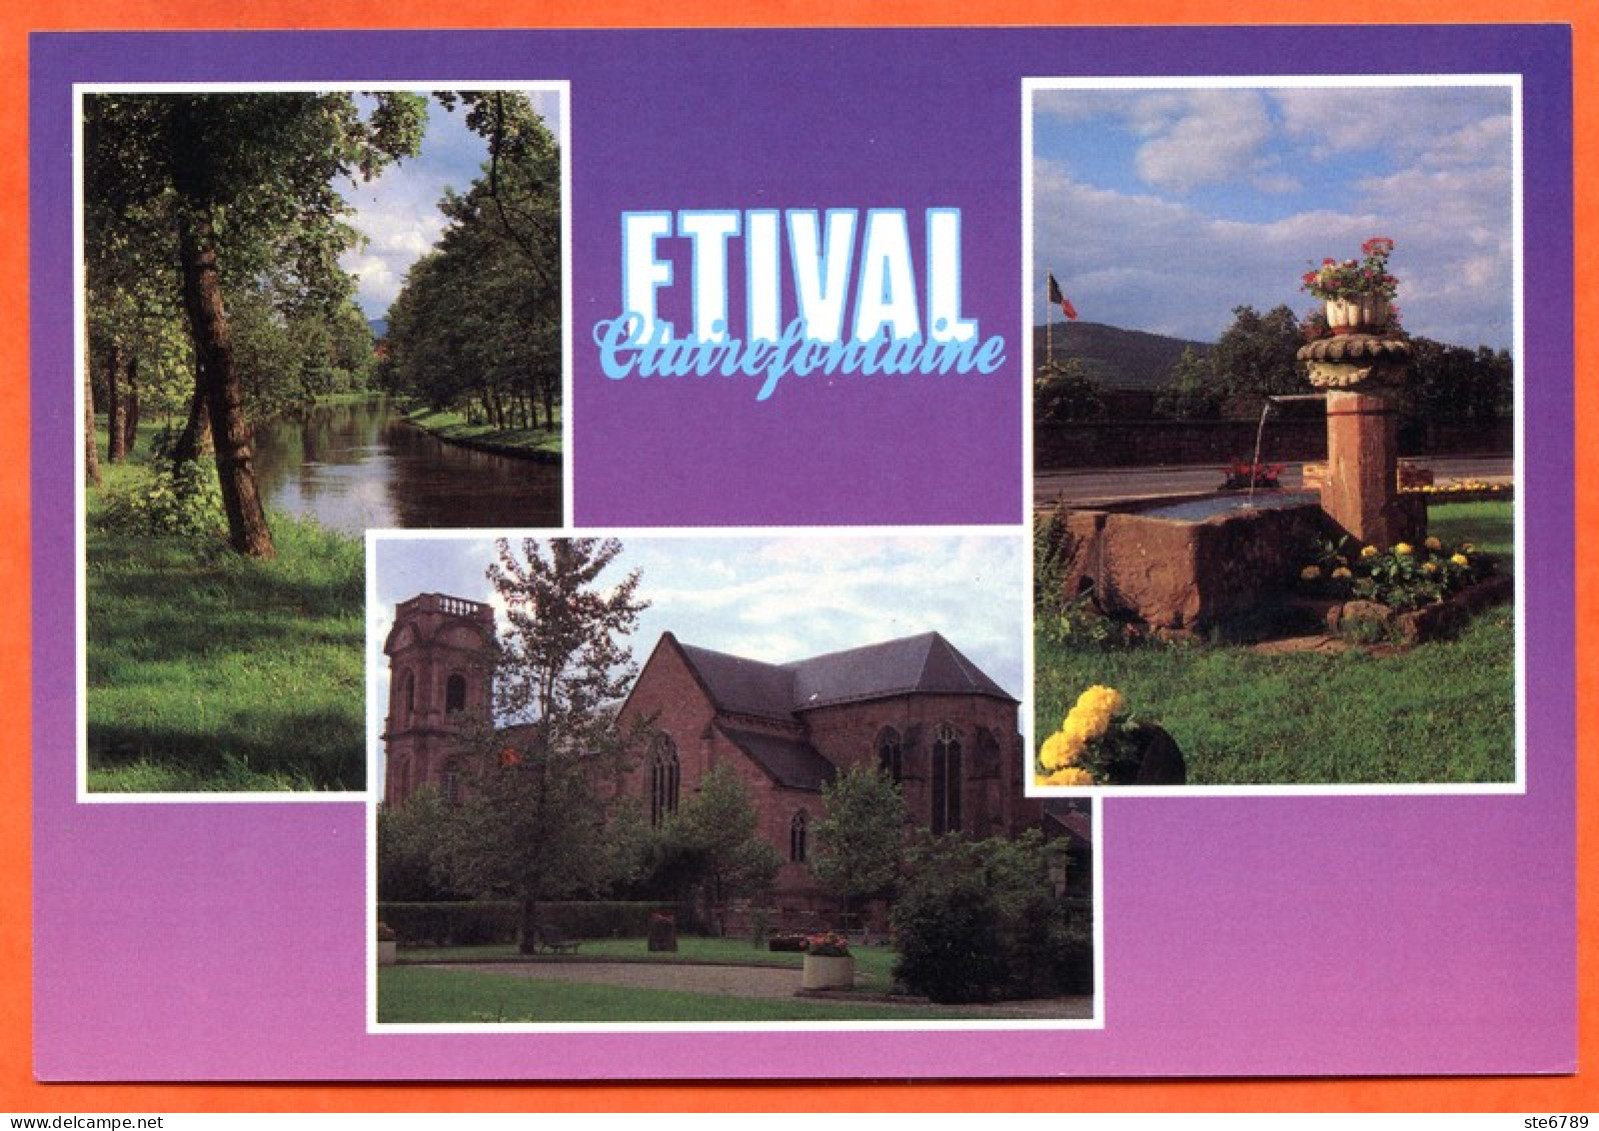 88 ETIVAL CLAIREFONTAINE Multivues Abbaye Canal Papeteries Fontaine Carte Vierge TBE - Etival Clairefontaine